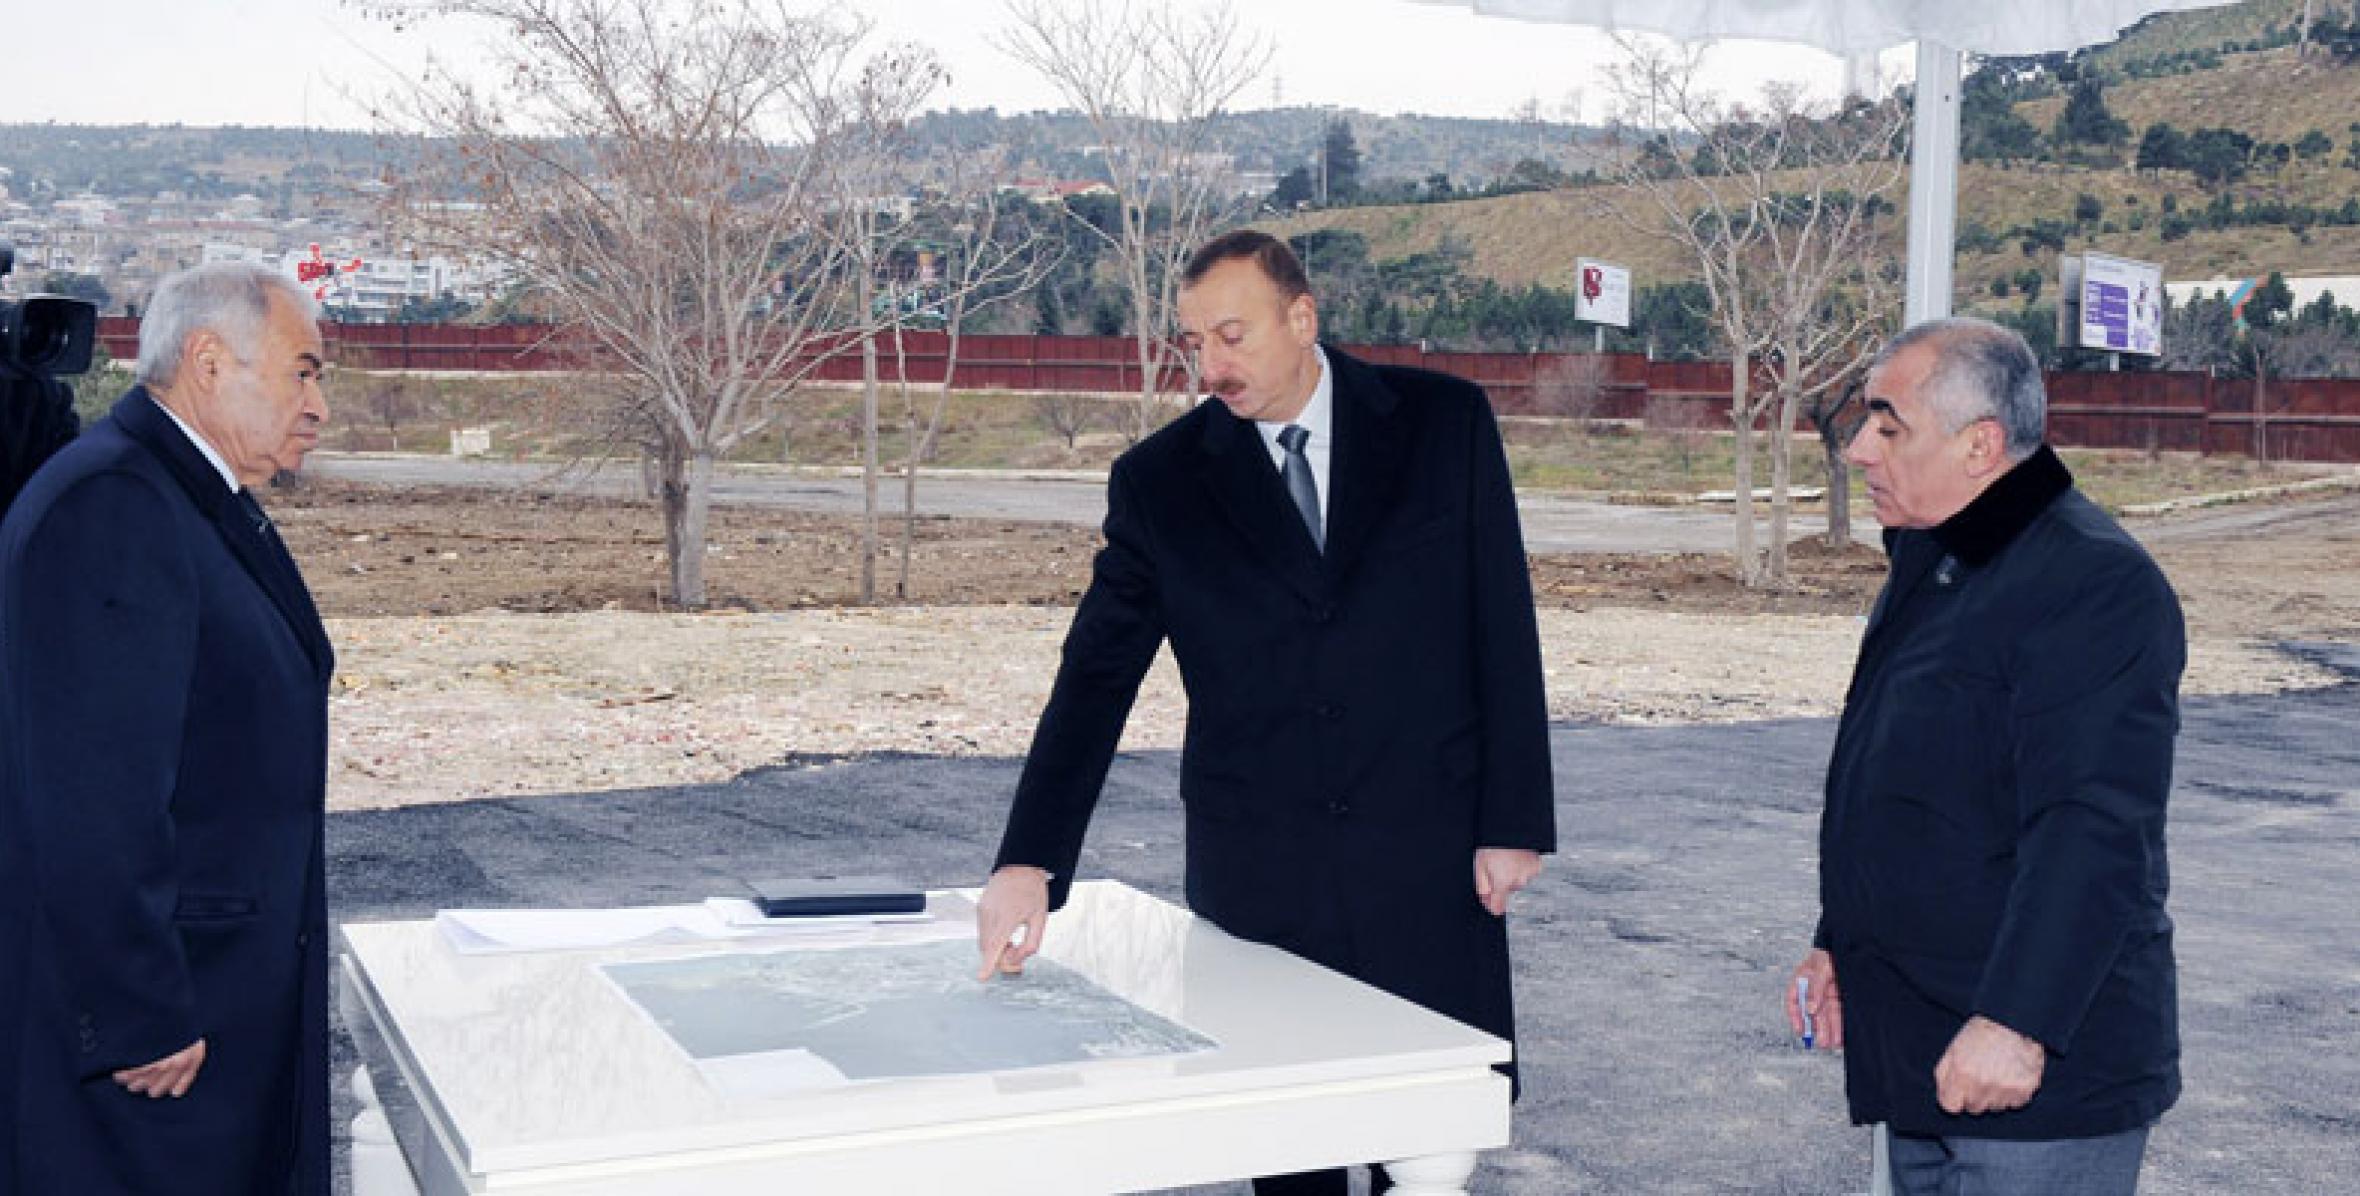 Ilham Aliyev checked out the progress of reconstruction works in the Baku Boulevard